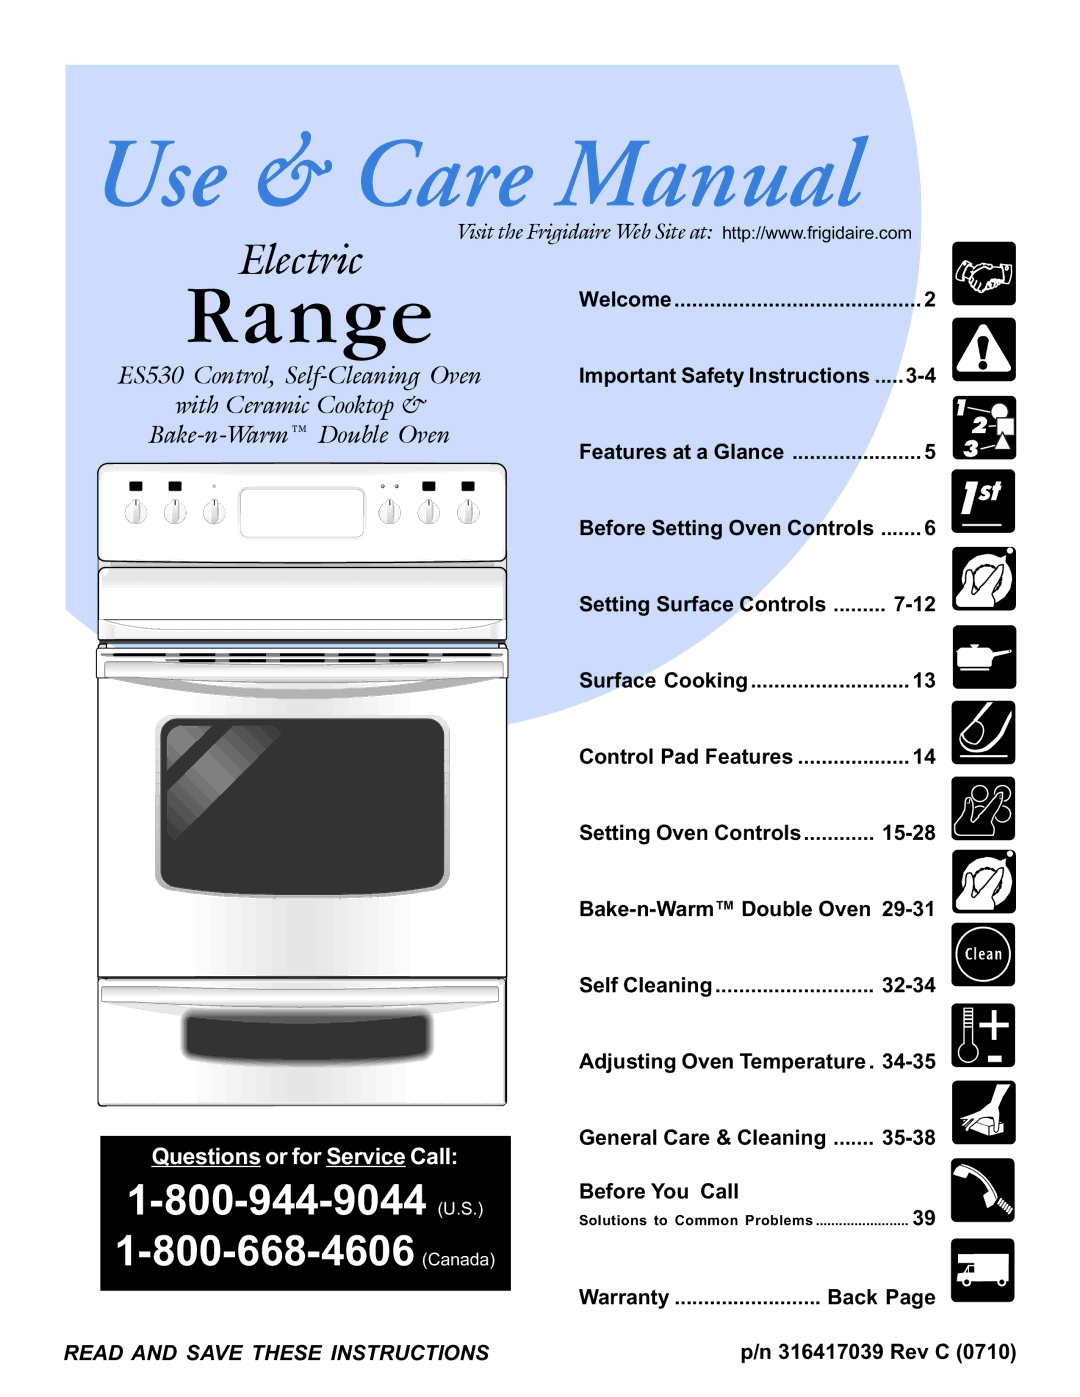 Frigidaire ES530 manual Welcome, Important Safety Instructions, Before Setting Oven Controls, Warranty Back, Rev C 